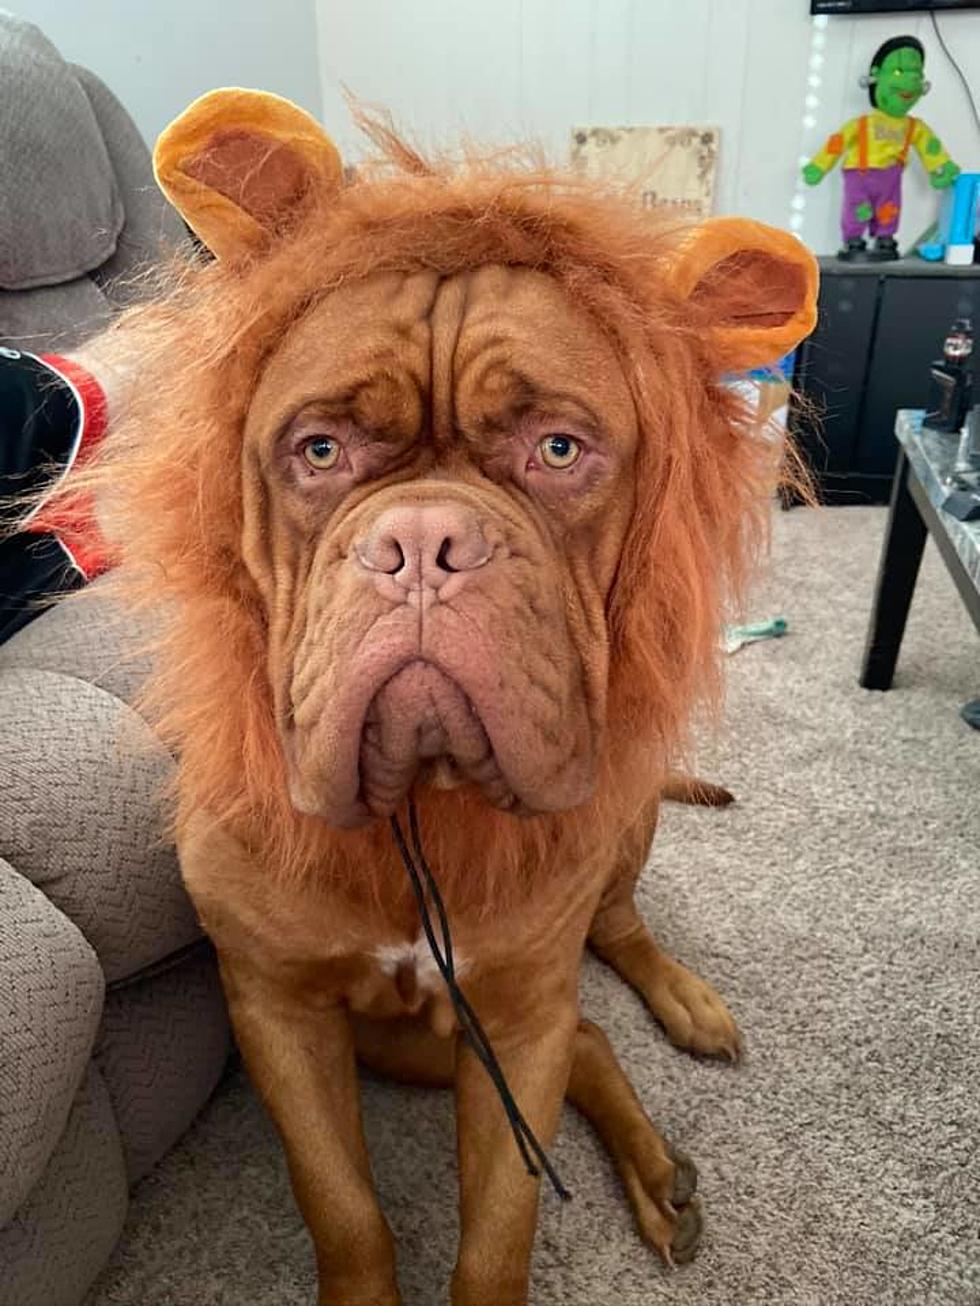 Do You Dress Up Your Animal? (Gallery)